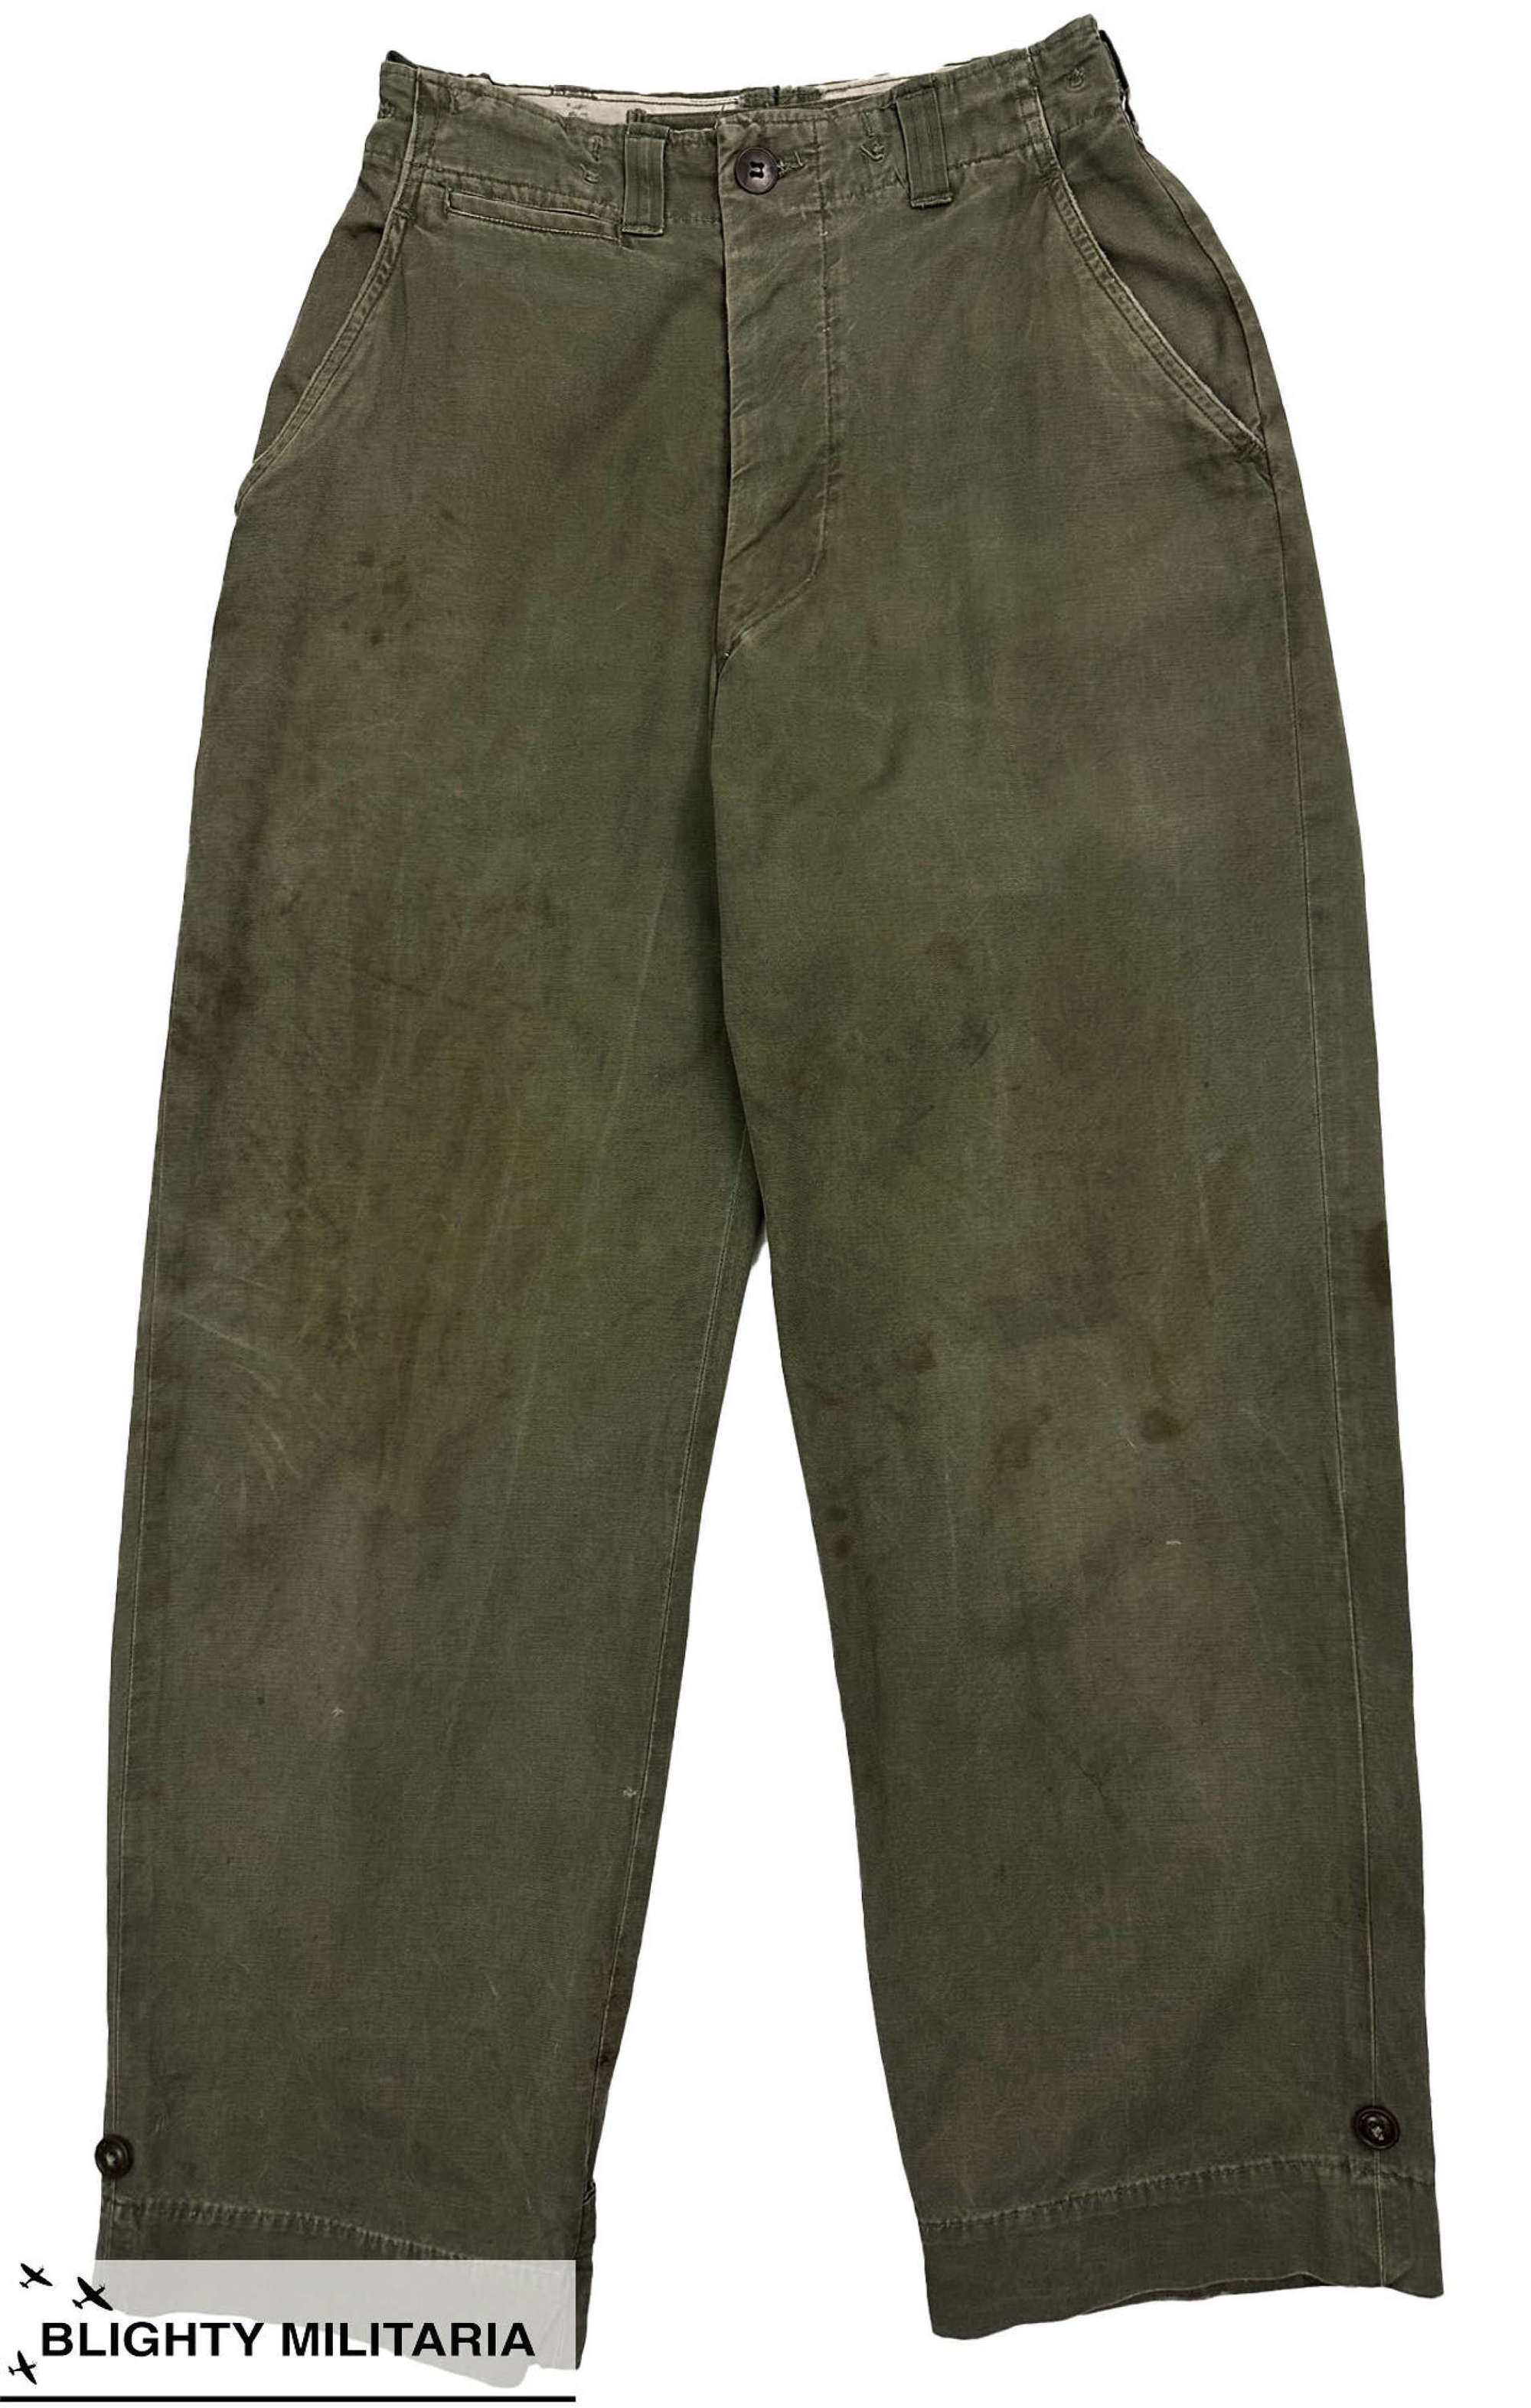 Original 1950 Dated US Army M1943 Pattern Trousers - Size 28x29